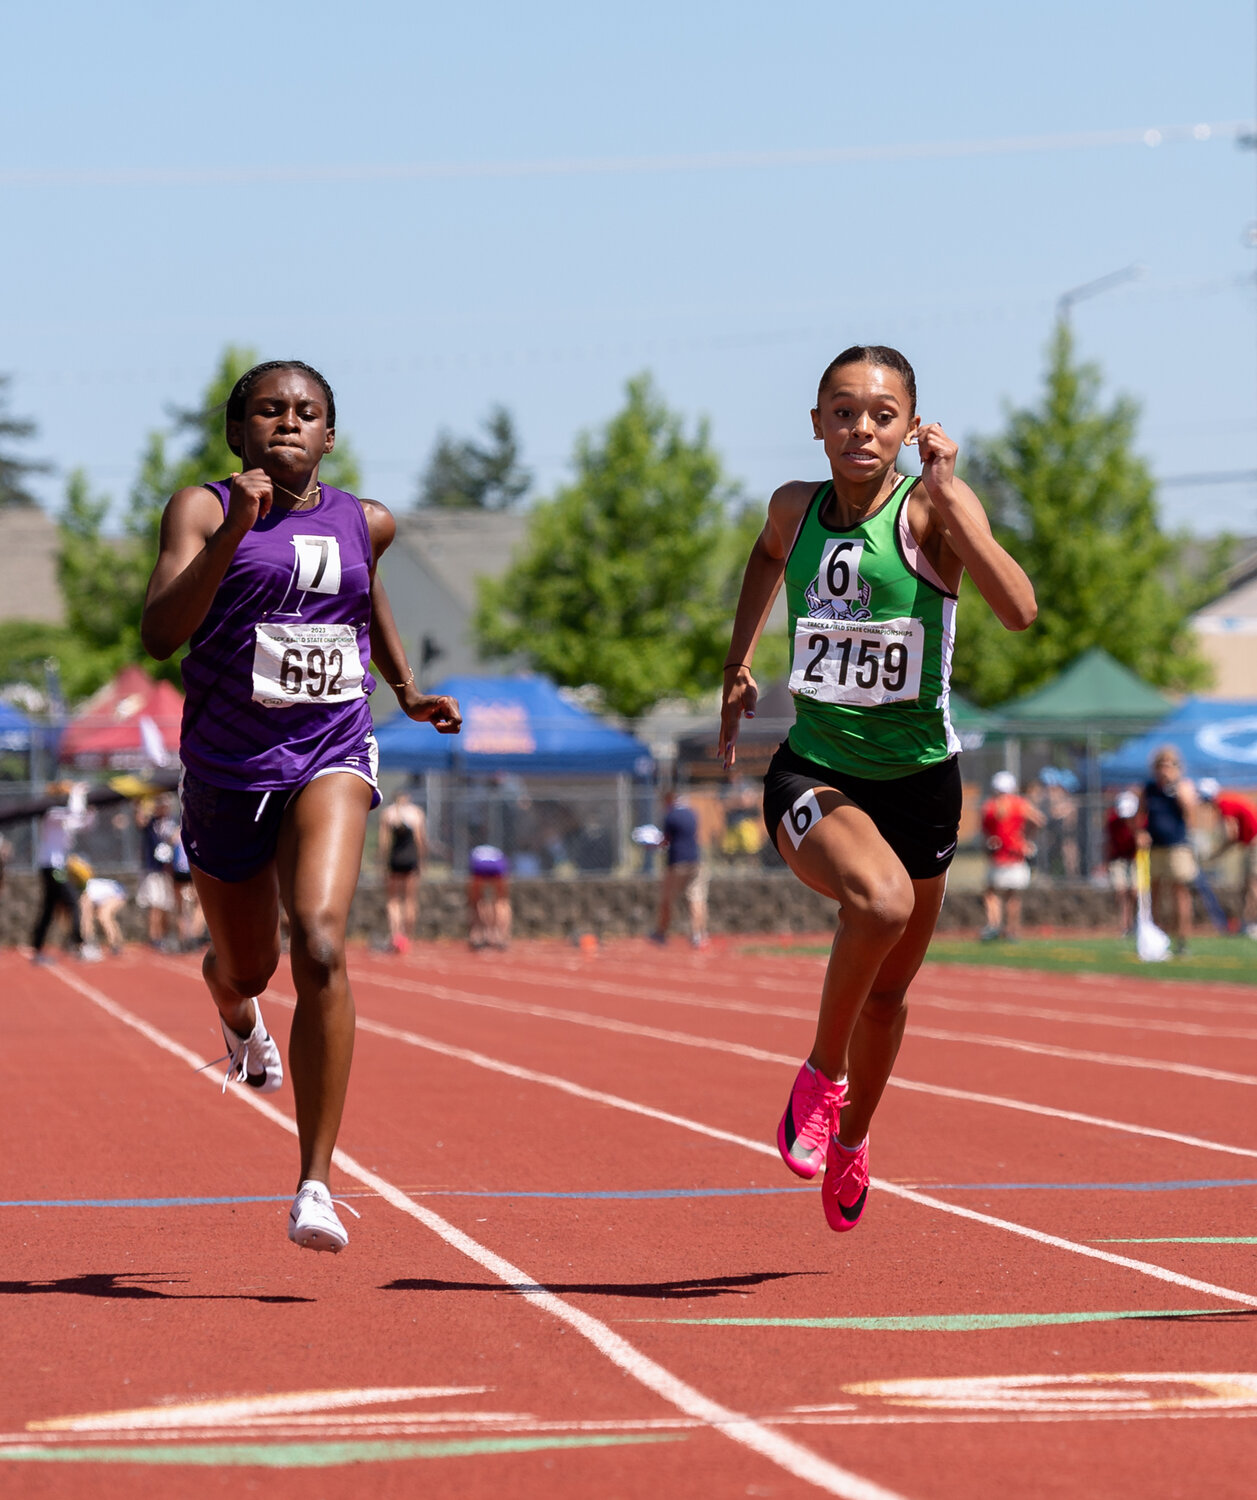 Tumwater’s Ava Jones races to the finish in a prelim of the 2A girls 100 at the WIAA 2A/3A/4A State Track and Field Championships on Friday, May 26, 2023, at Mount Tahoma High School in Tacoma. (Joshua Hart/For The Chronicle)